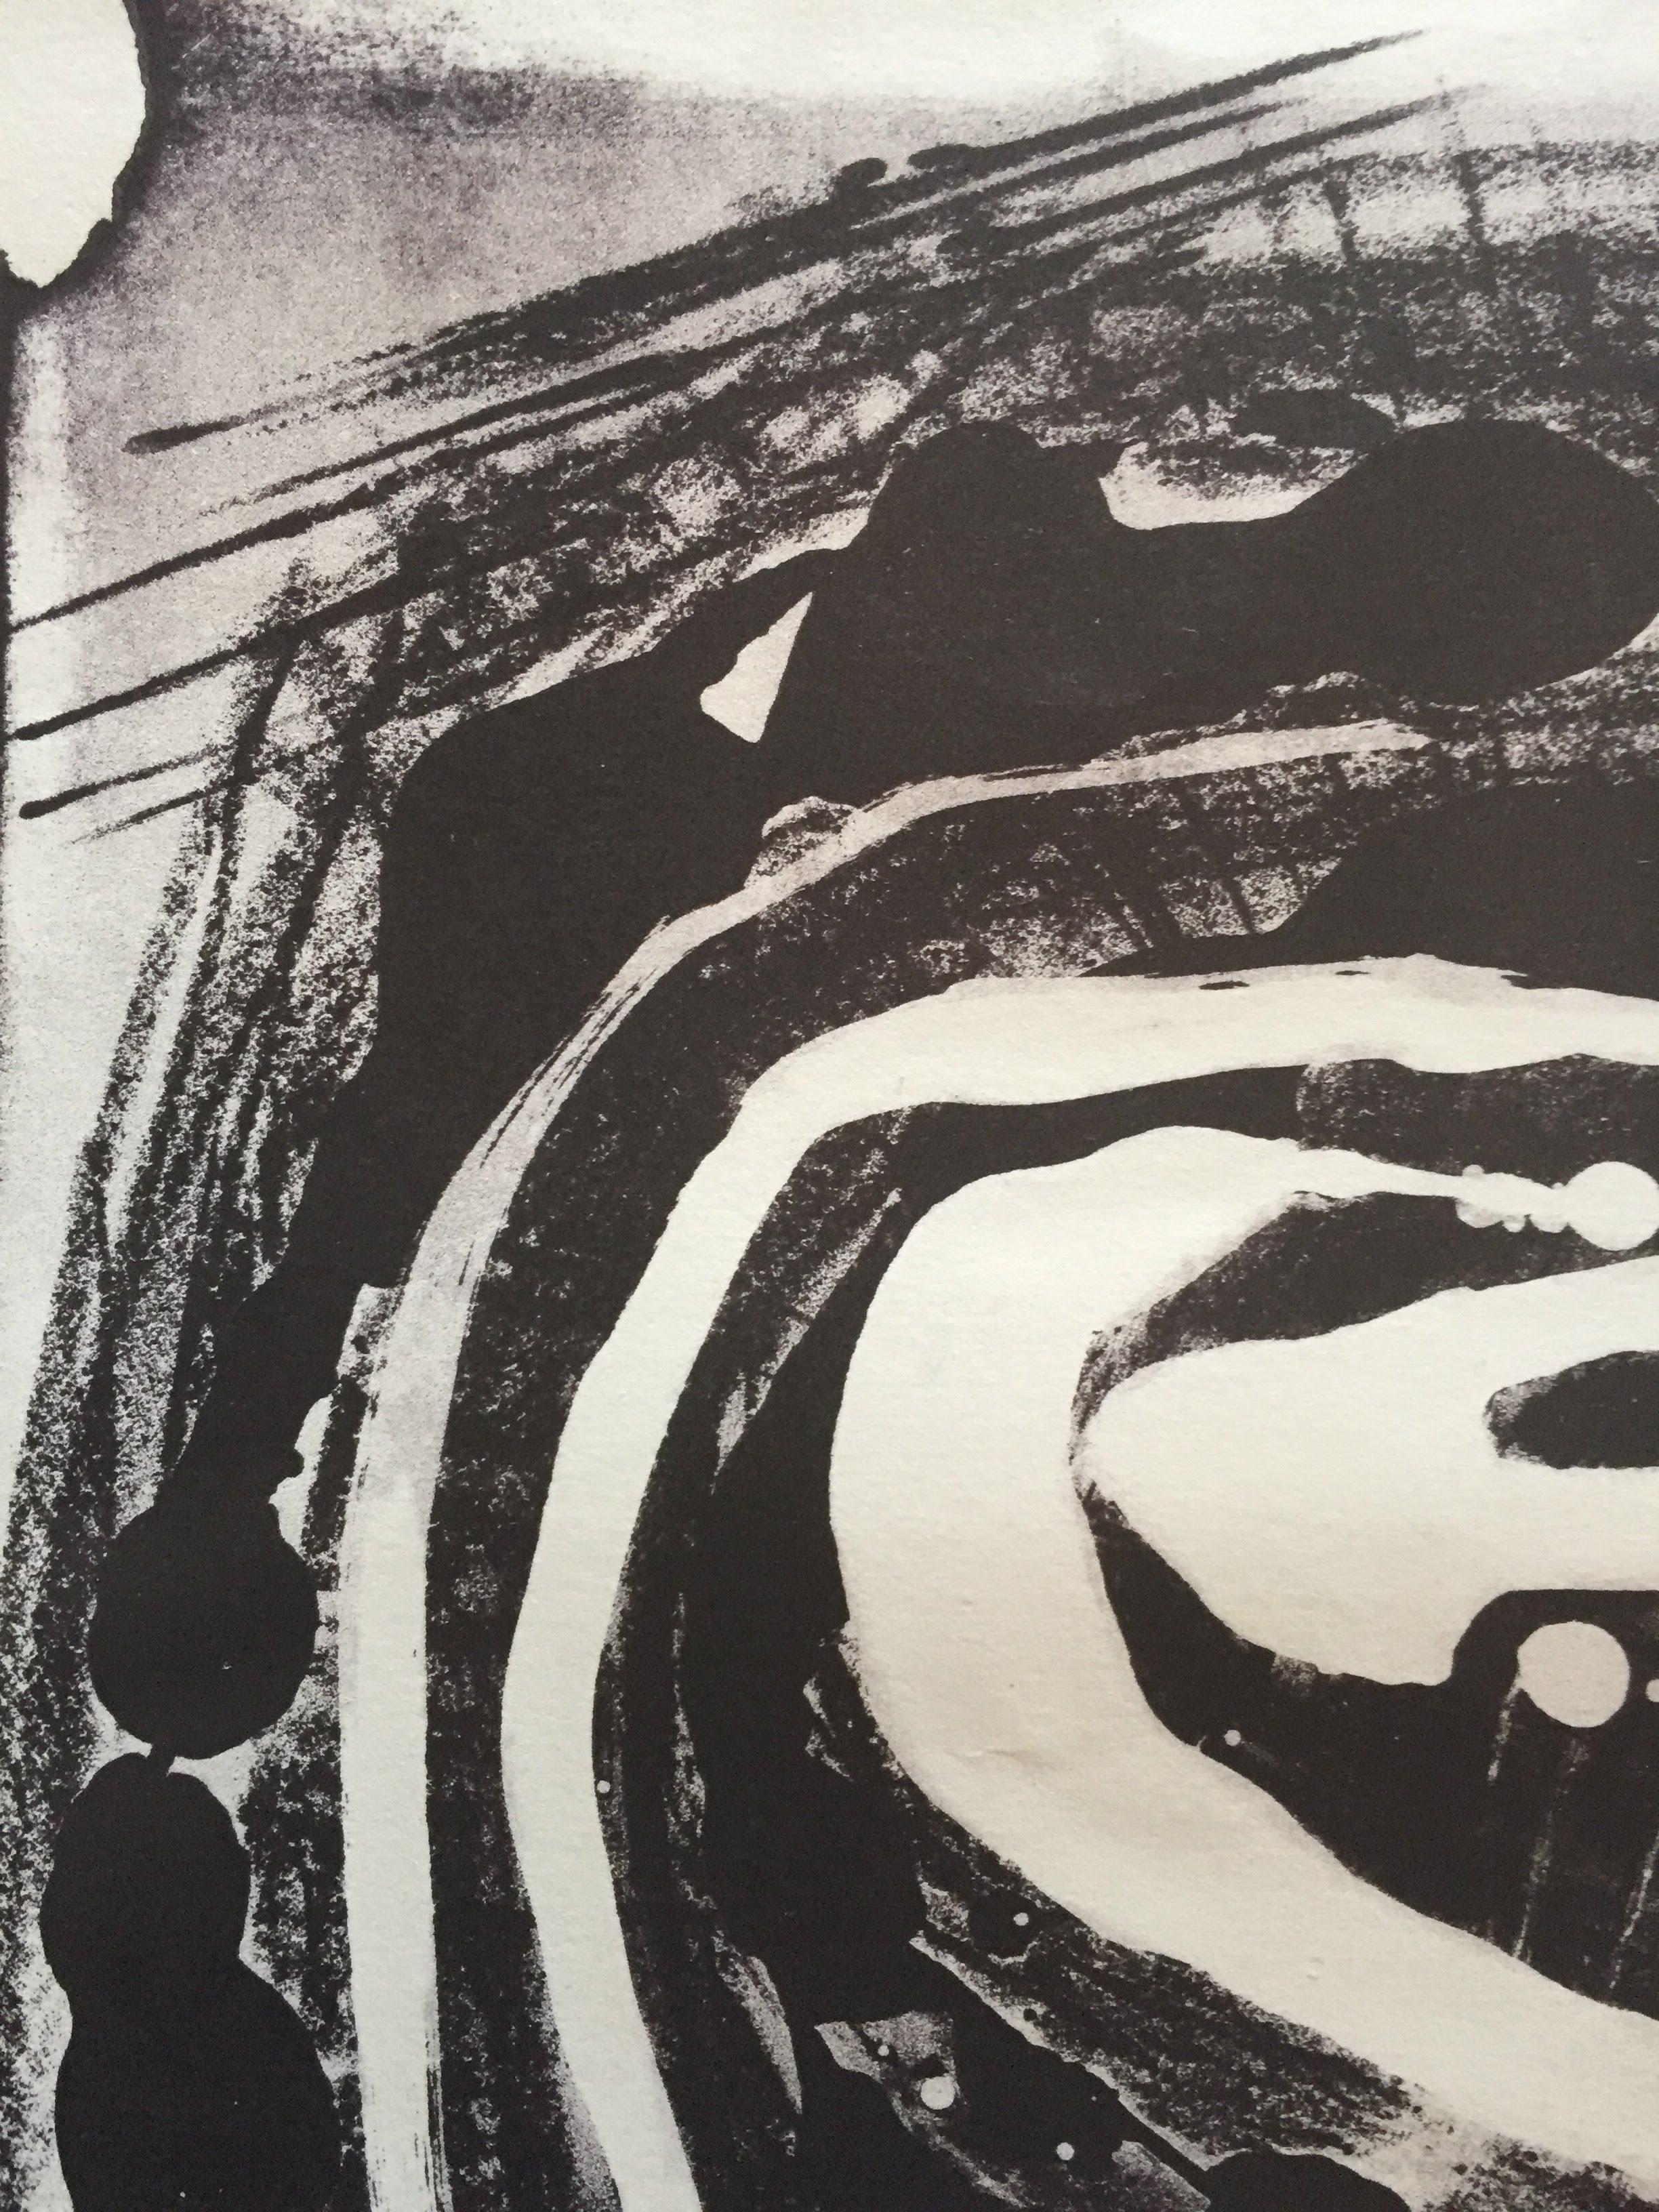 Abstract Stone Lithograph 1950s San Francisco Black and White Original Art 1